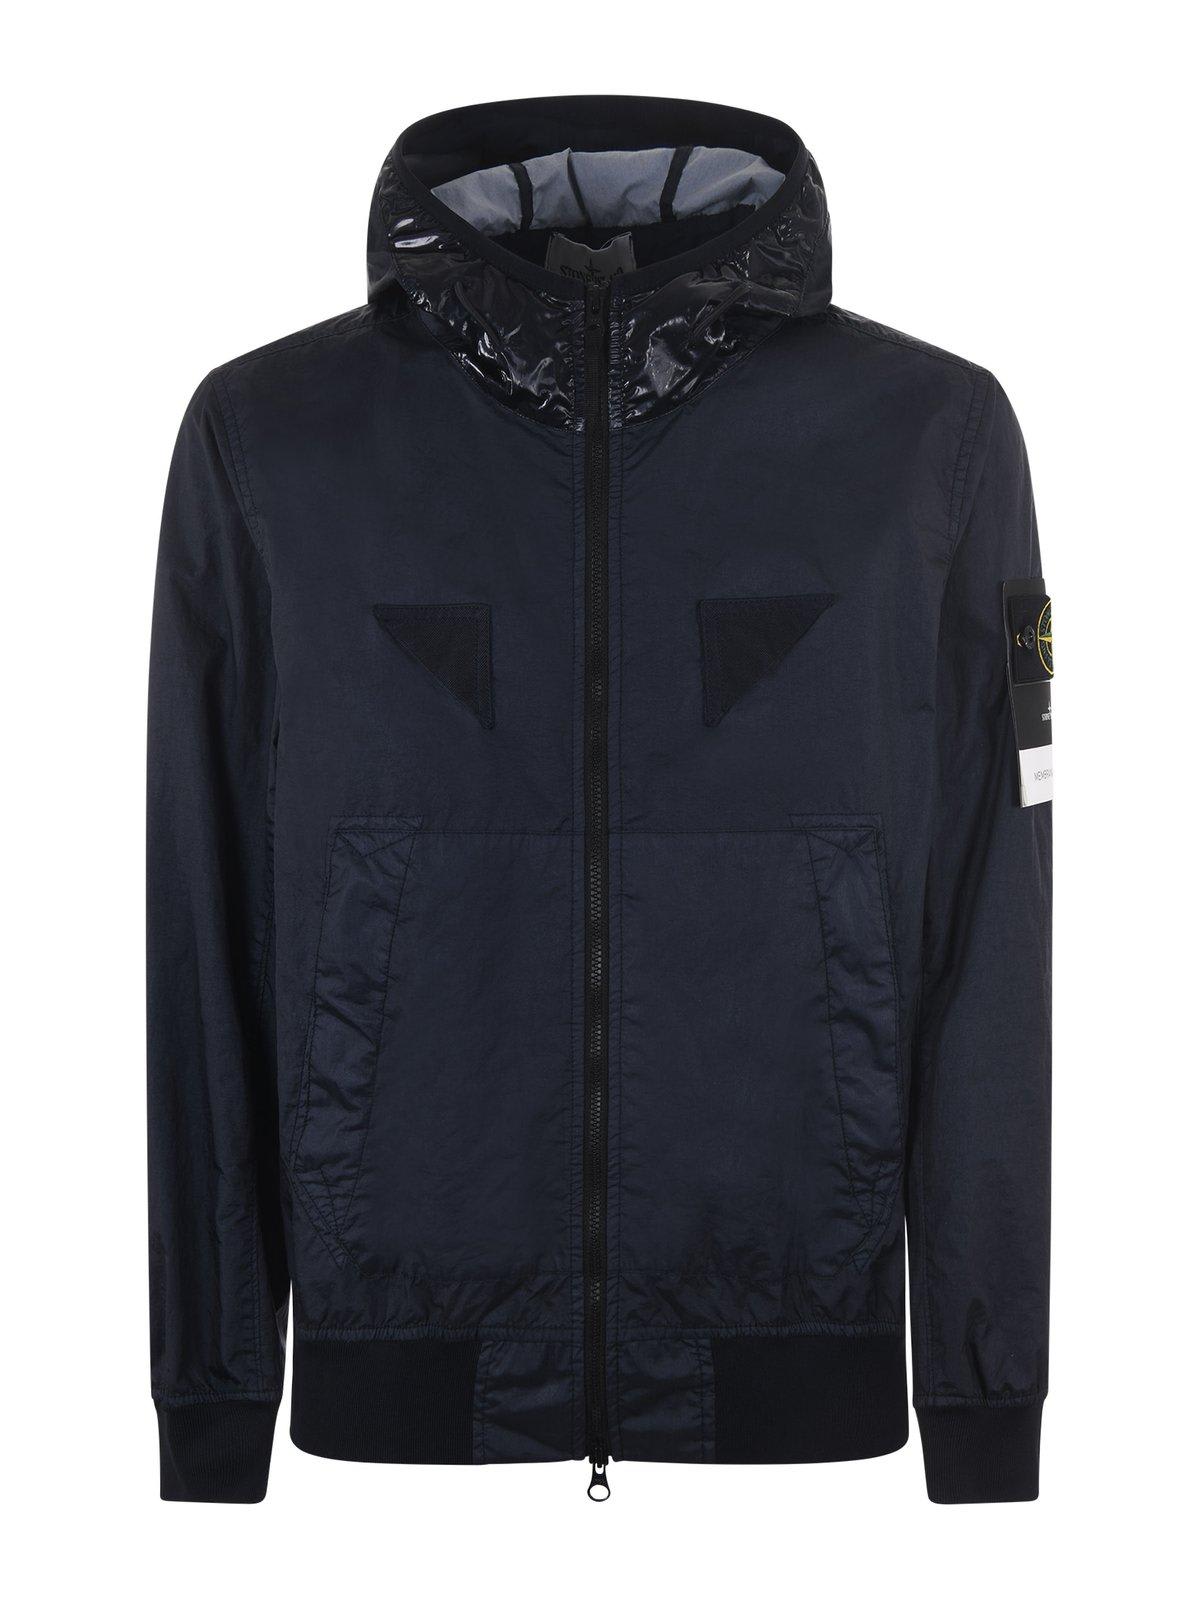 Compass-patch Zipped Hooded Jacket